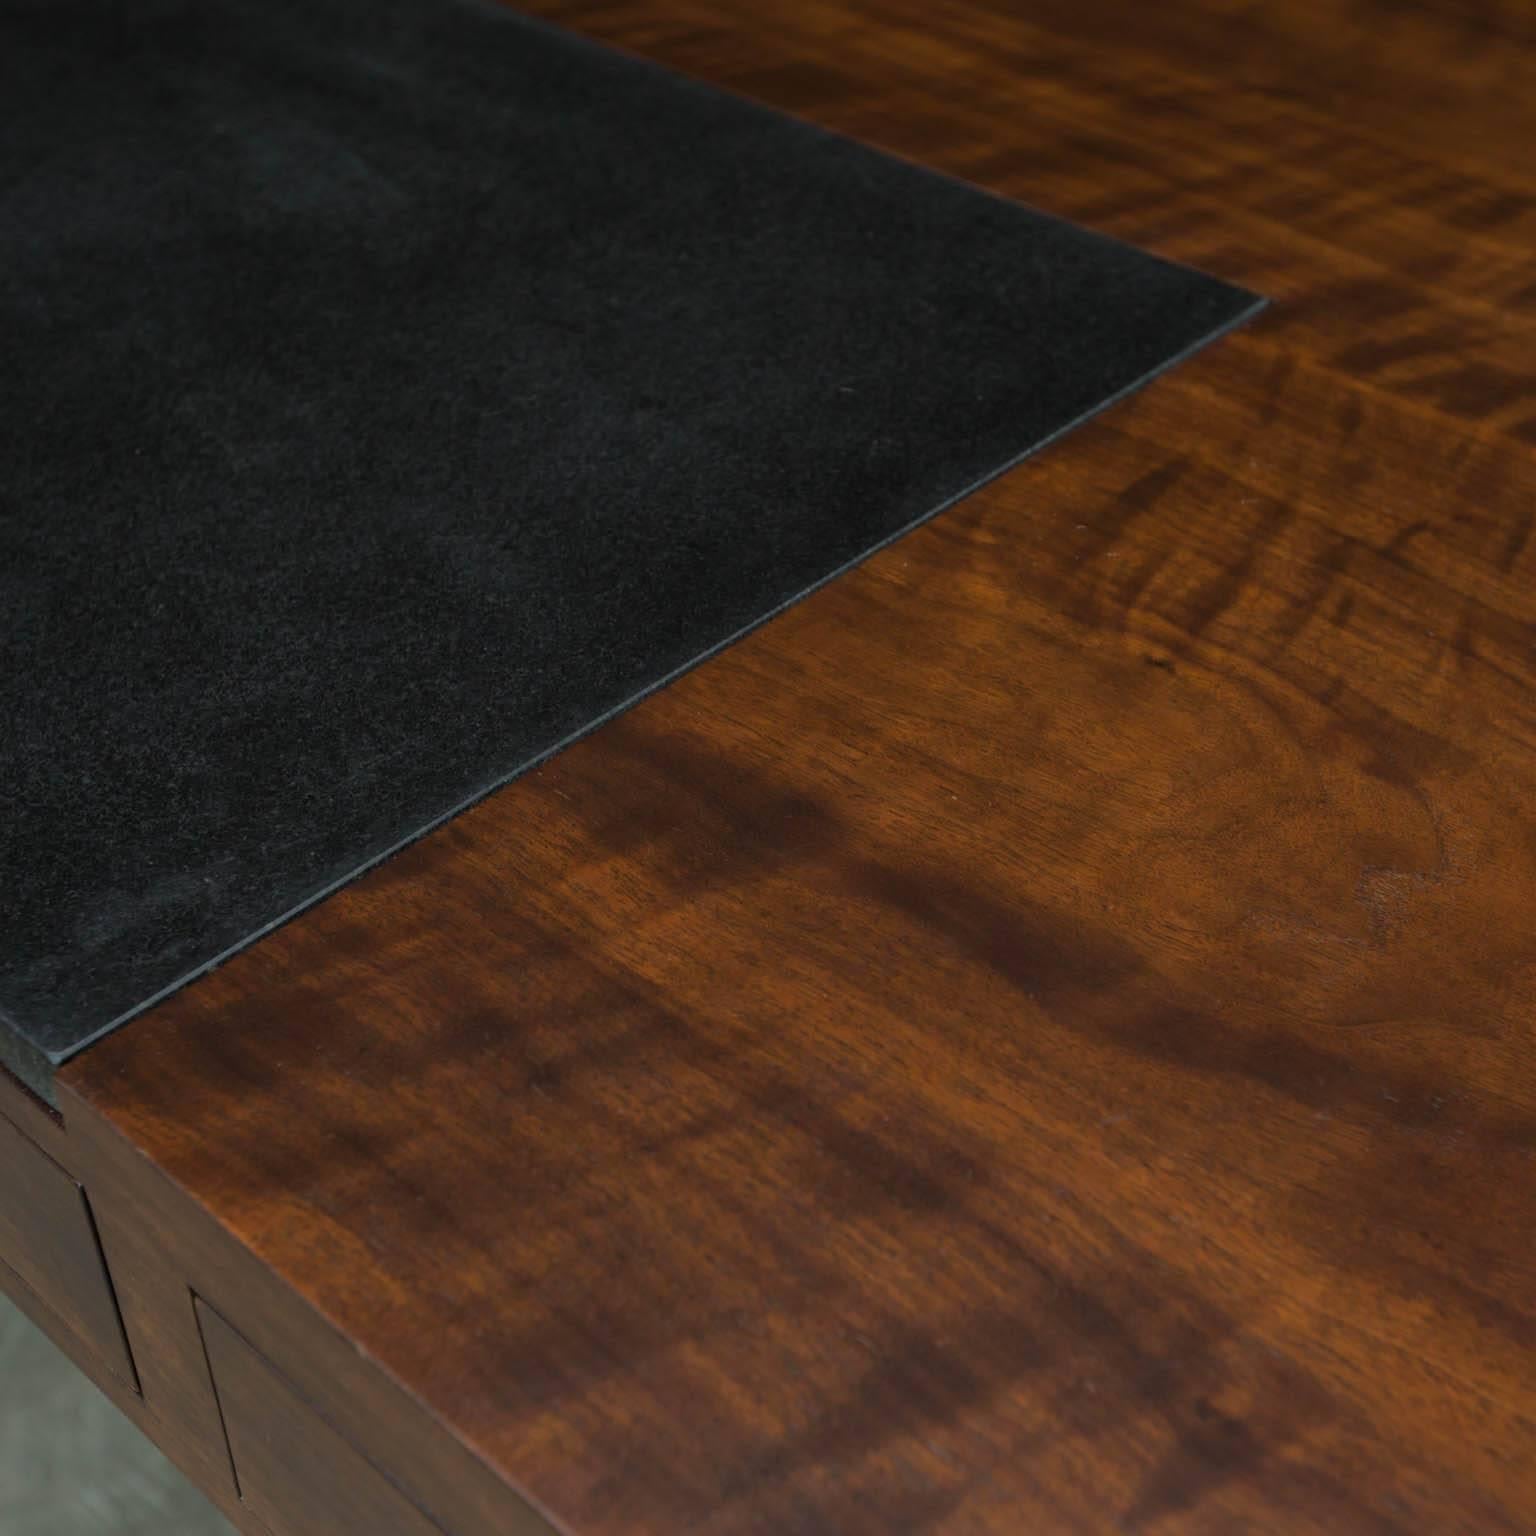 Patinated Modern Walnut and Granite Executive Desk by Gregory Clark For Sale